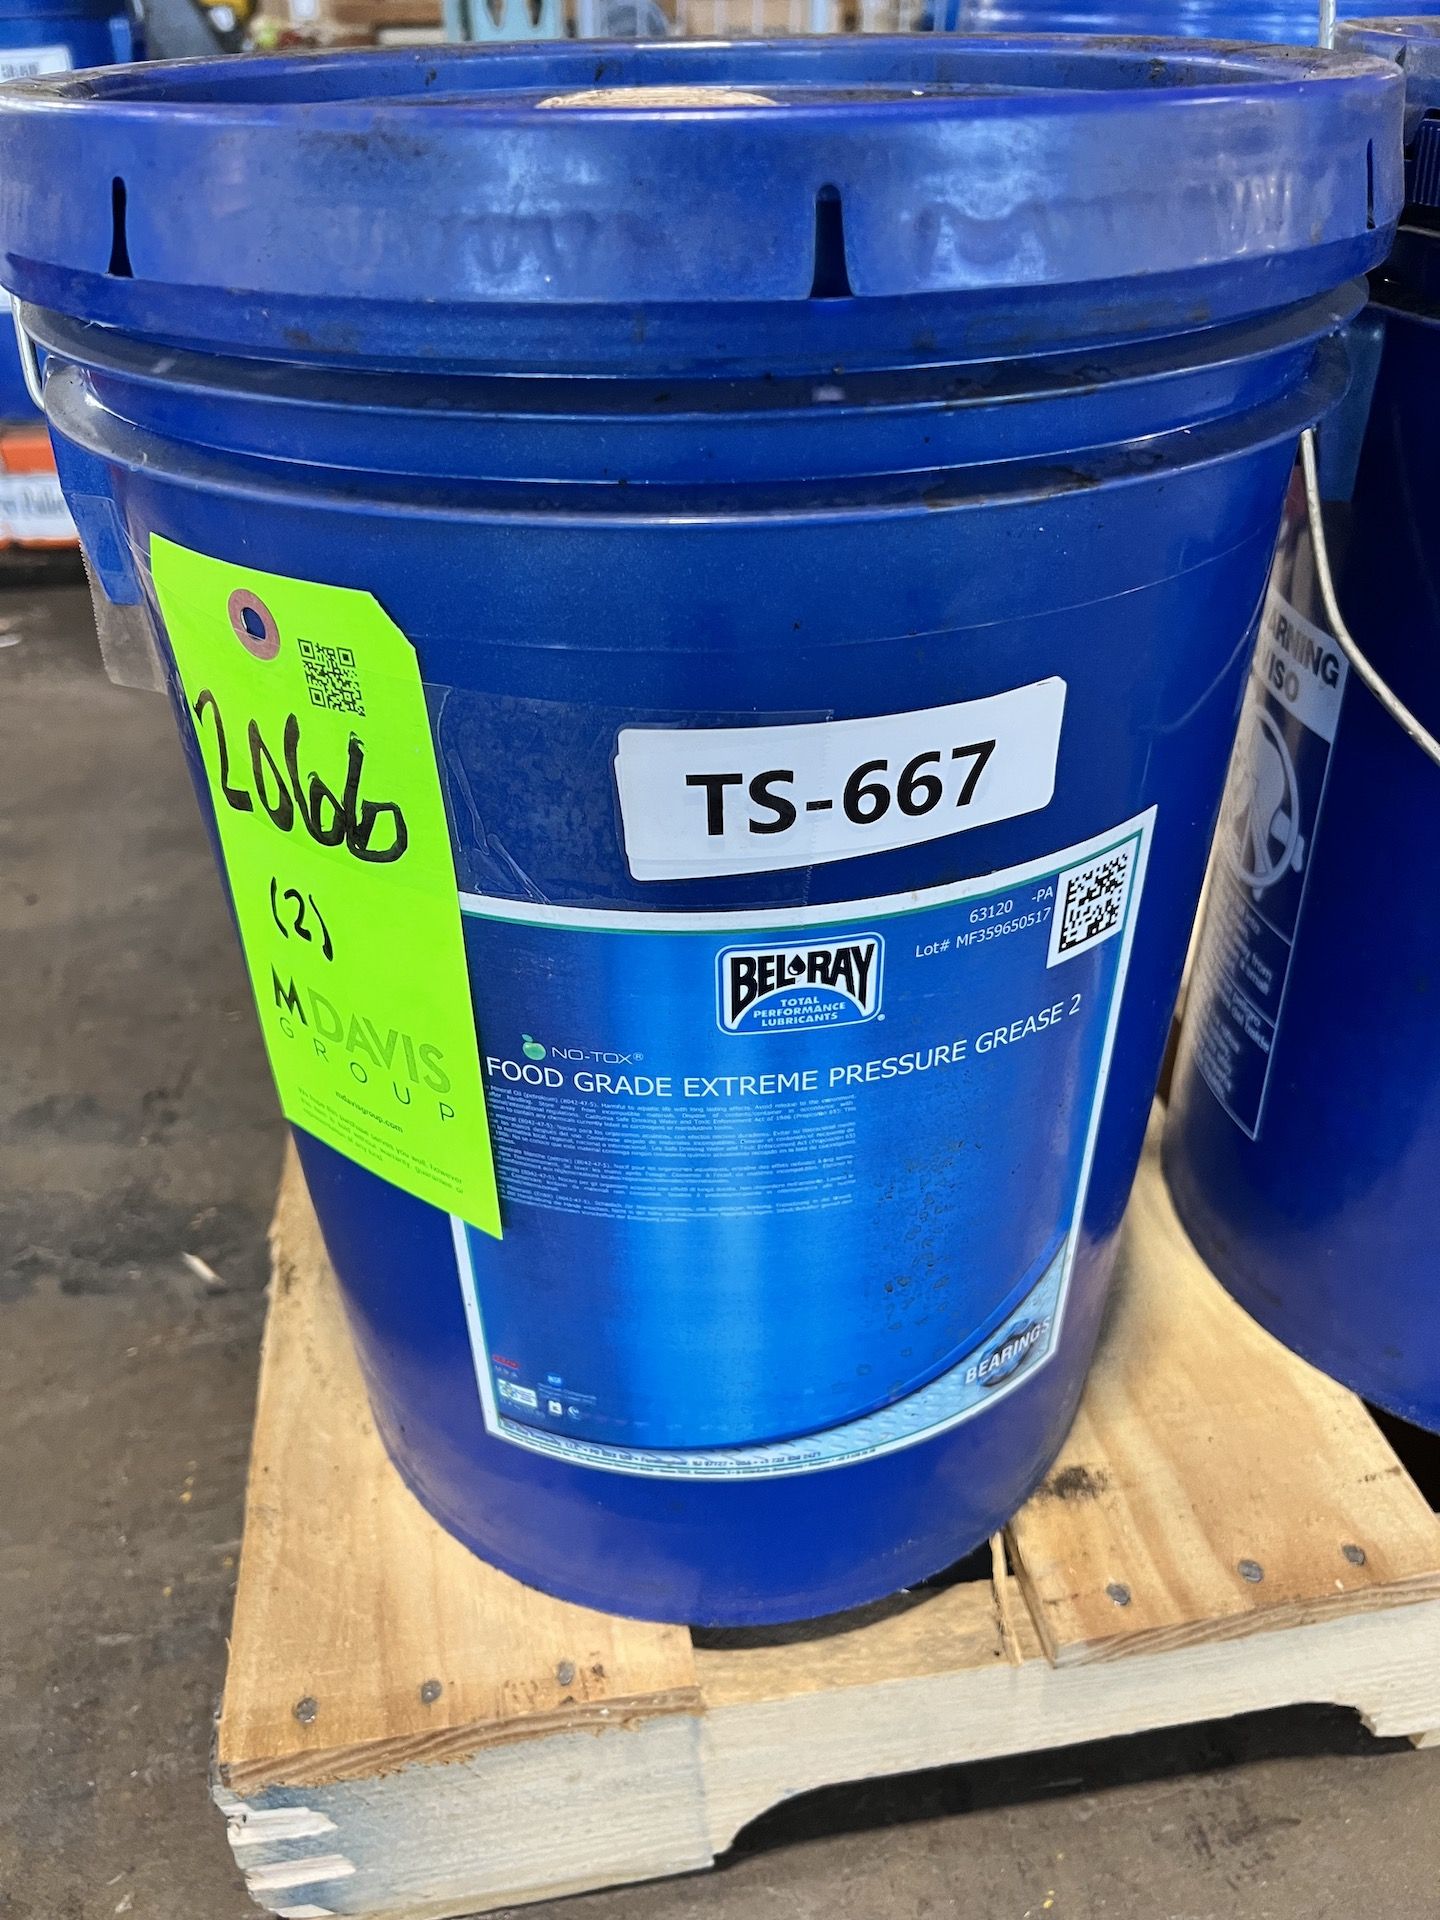 (2) Belray No Tox Food Grade Extreme Pressure Grease 2, Product # 63120-PA , 5 Gallon Pails - Image 3 of 3